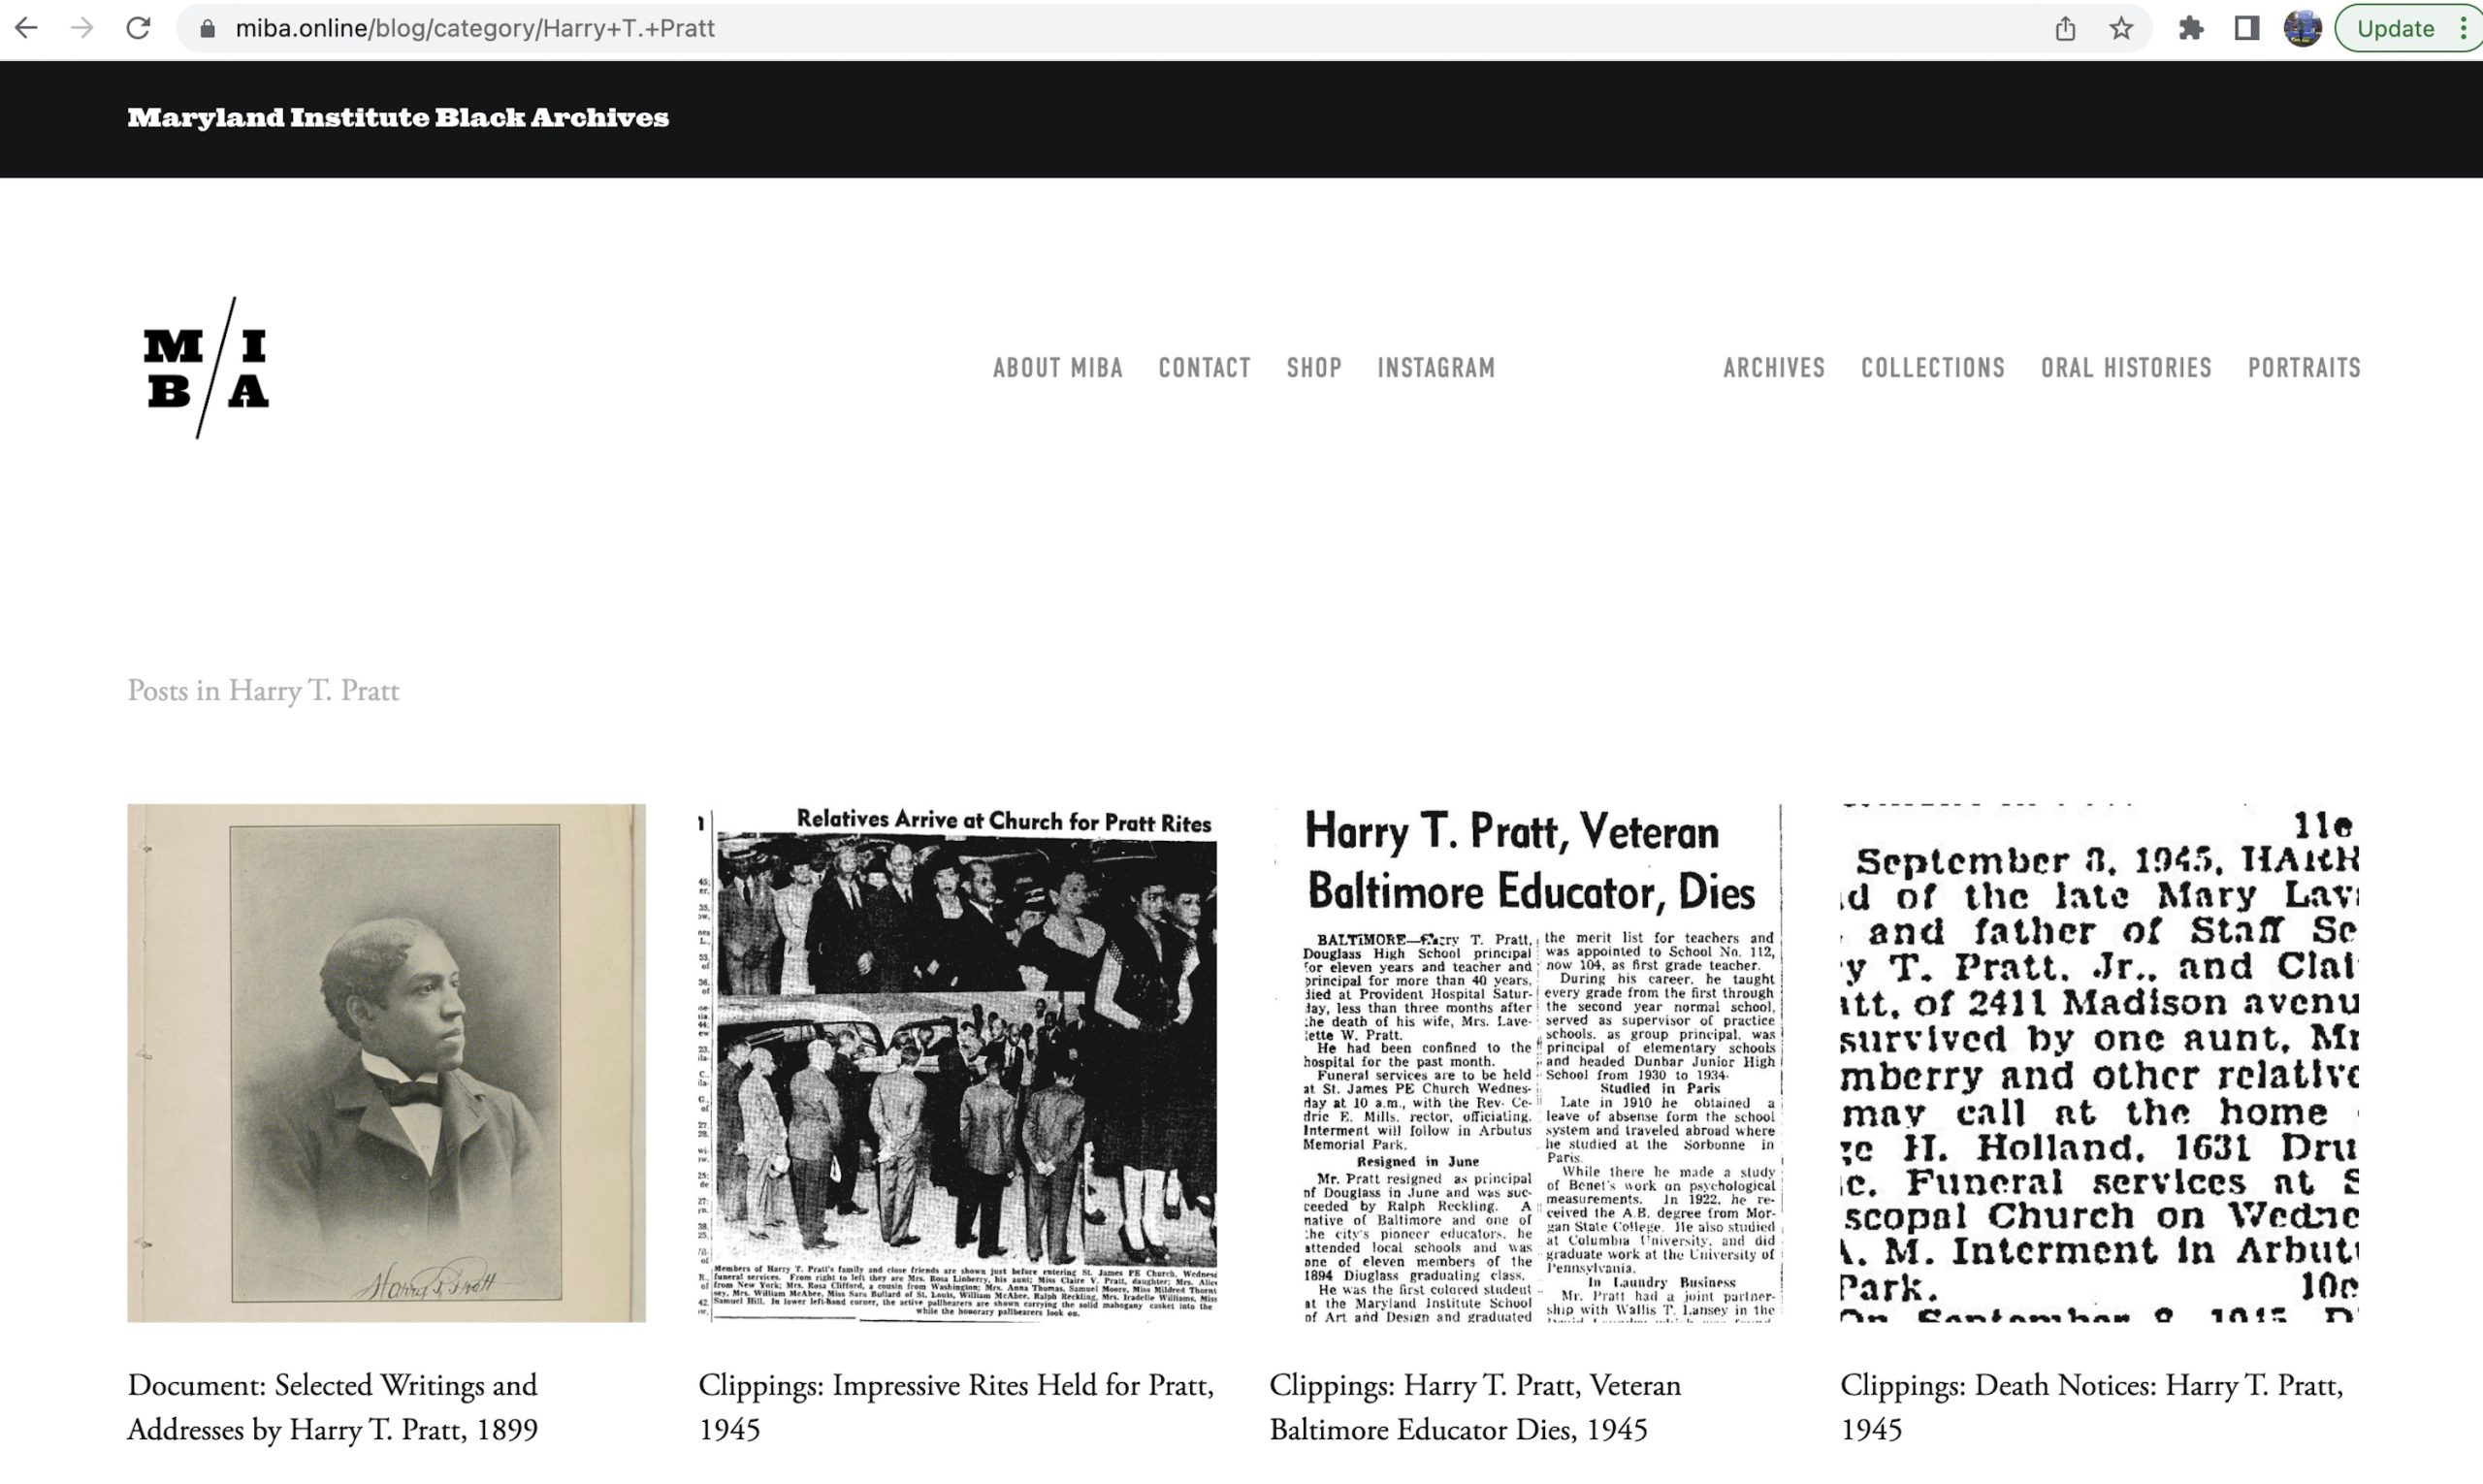 Screenshot of a page on the Maryland Institute Black Archives website showing four square thumbnail images of archival items with brief captions underneath